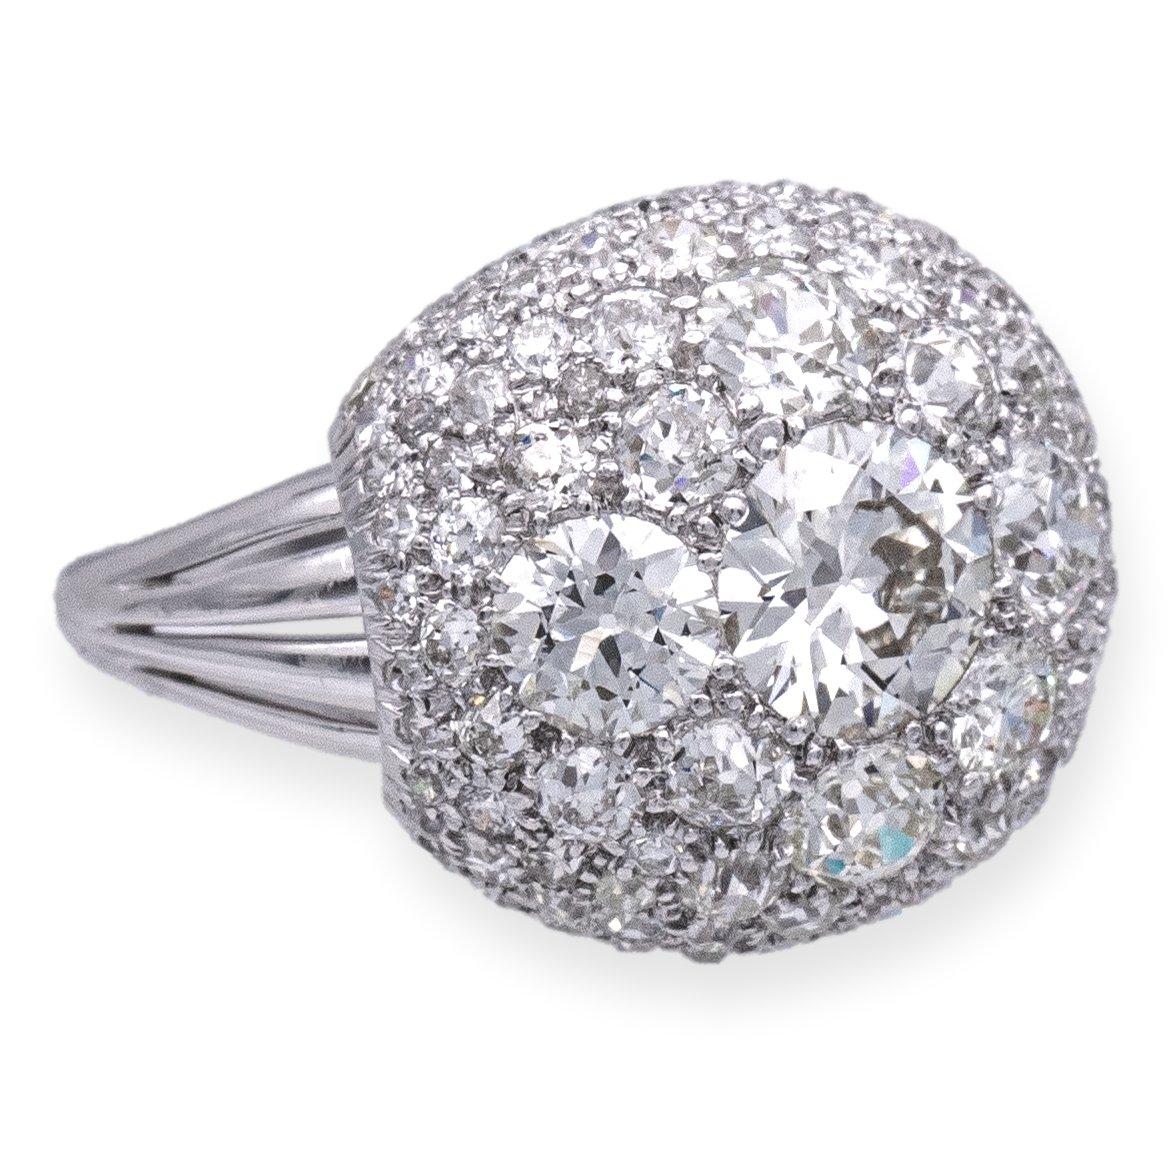 Exquisite vintage cocktail ring, meticulously crafted in platinum. Its distinctive dome cluster design showcases a harmonious fusion of old European cut diamonds, round cut and single cut diamonds, boasting a remarkable total weight of 5.11 carats.